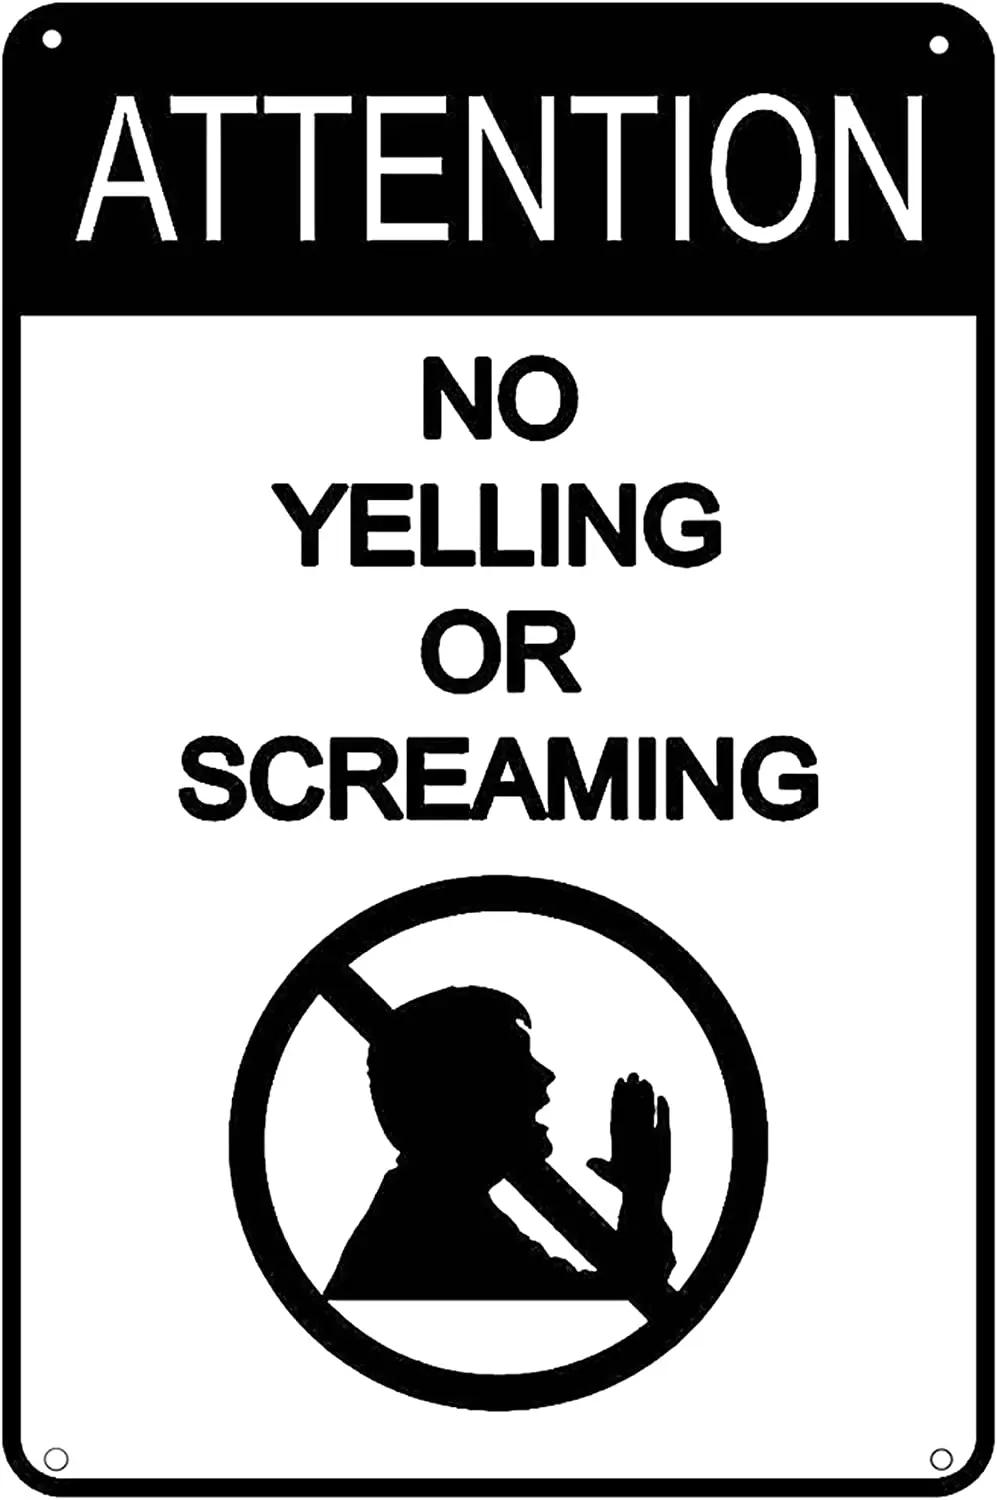 

Indoor and Outdoor Metal Warning Signs Attention No Yelling or Screaming Decorative Metal Tin Plate 8x12 or 12x16 Inches